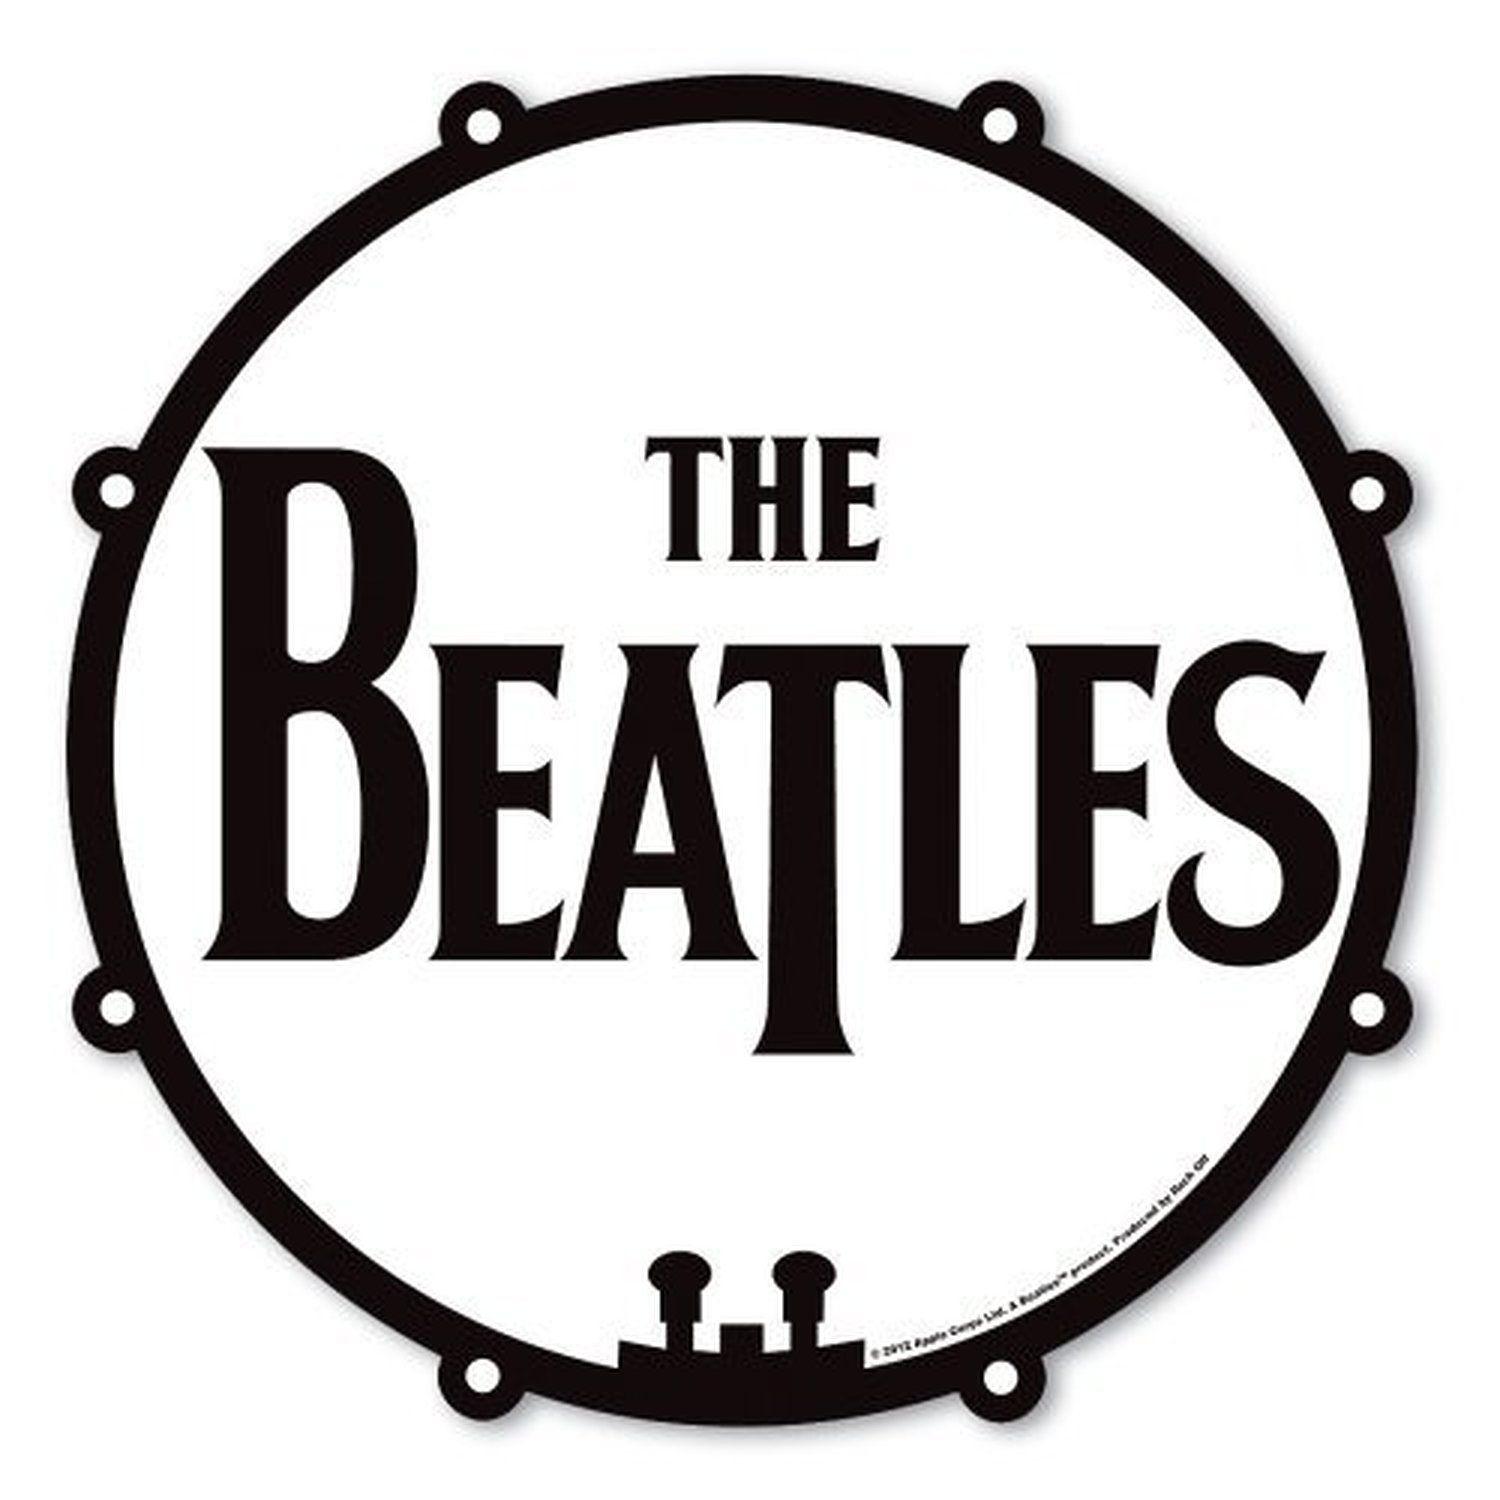 The Beatles Logo - Details about The Beatles Drum Logo Drop T Black White Mouse Mat Gaming Pad  Official Gift Idea